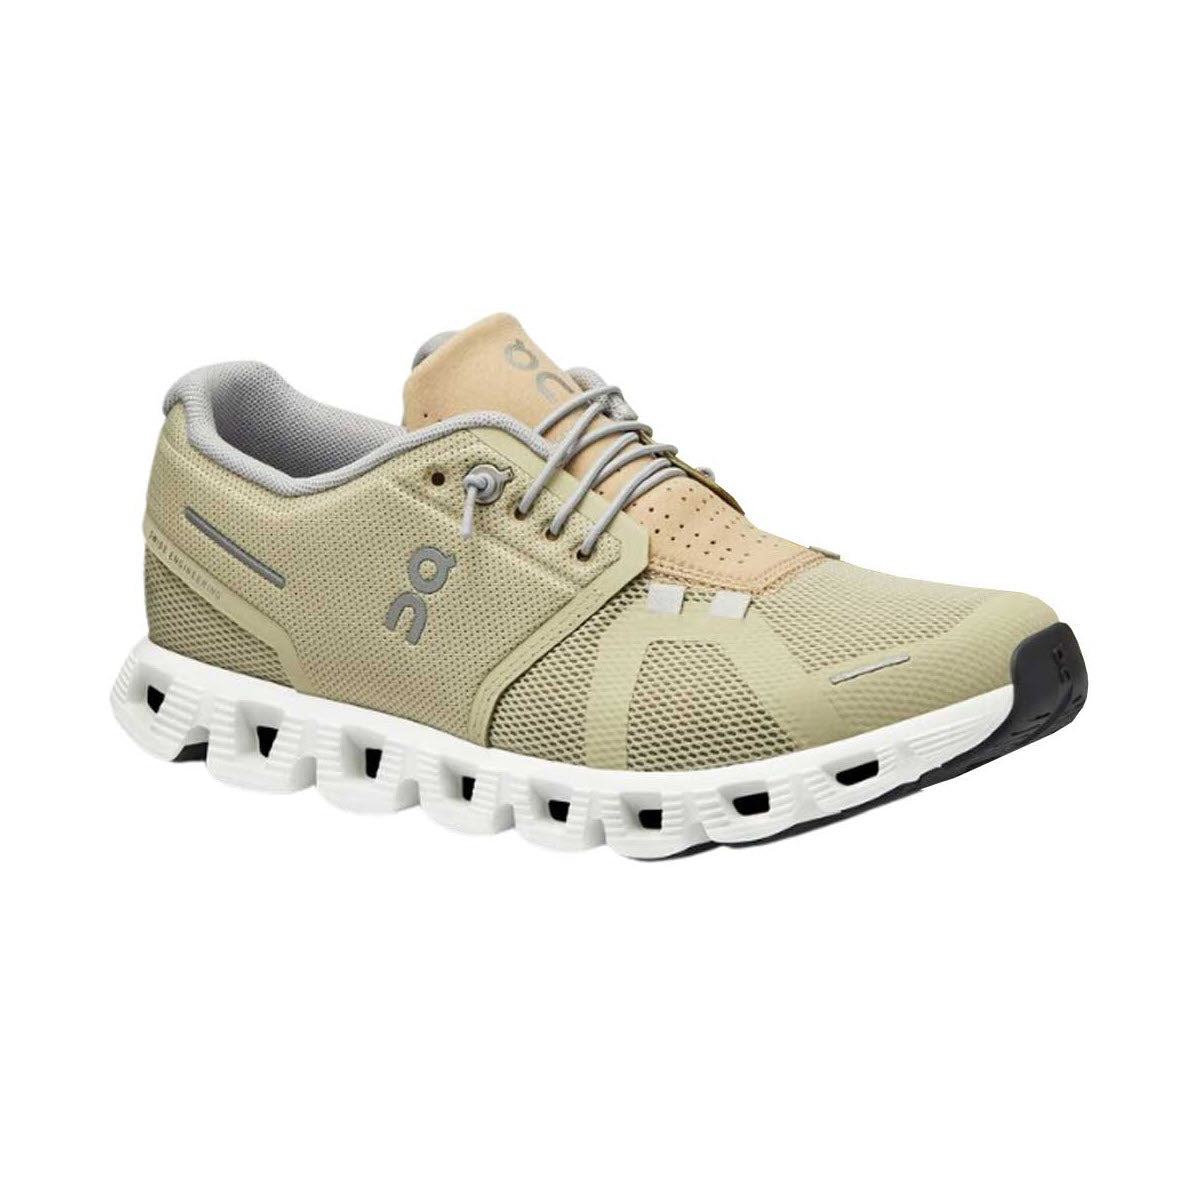 A single beige ON CLOUD 5 HAZE/SAND - WOMENS athletic shoe with mesh panels and an improved fit, featuring a white sole, isolated on a white background.